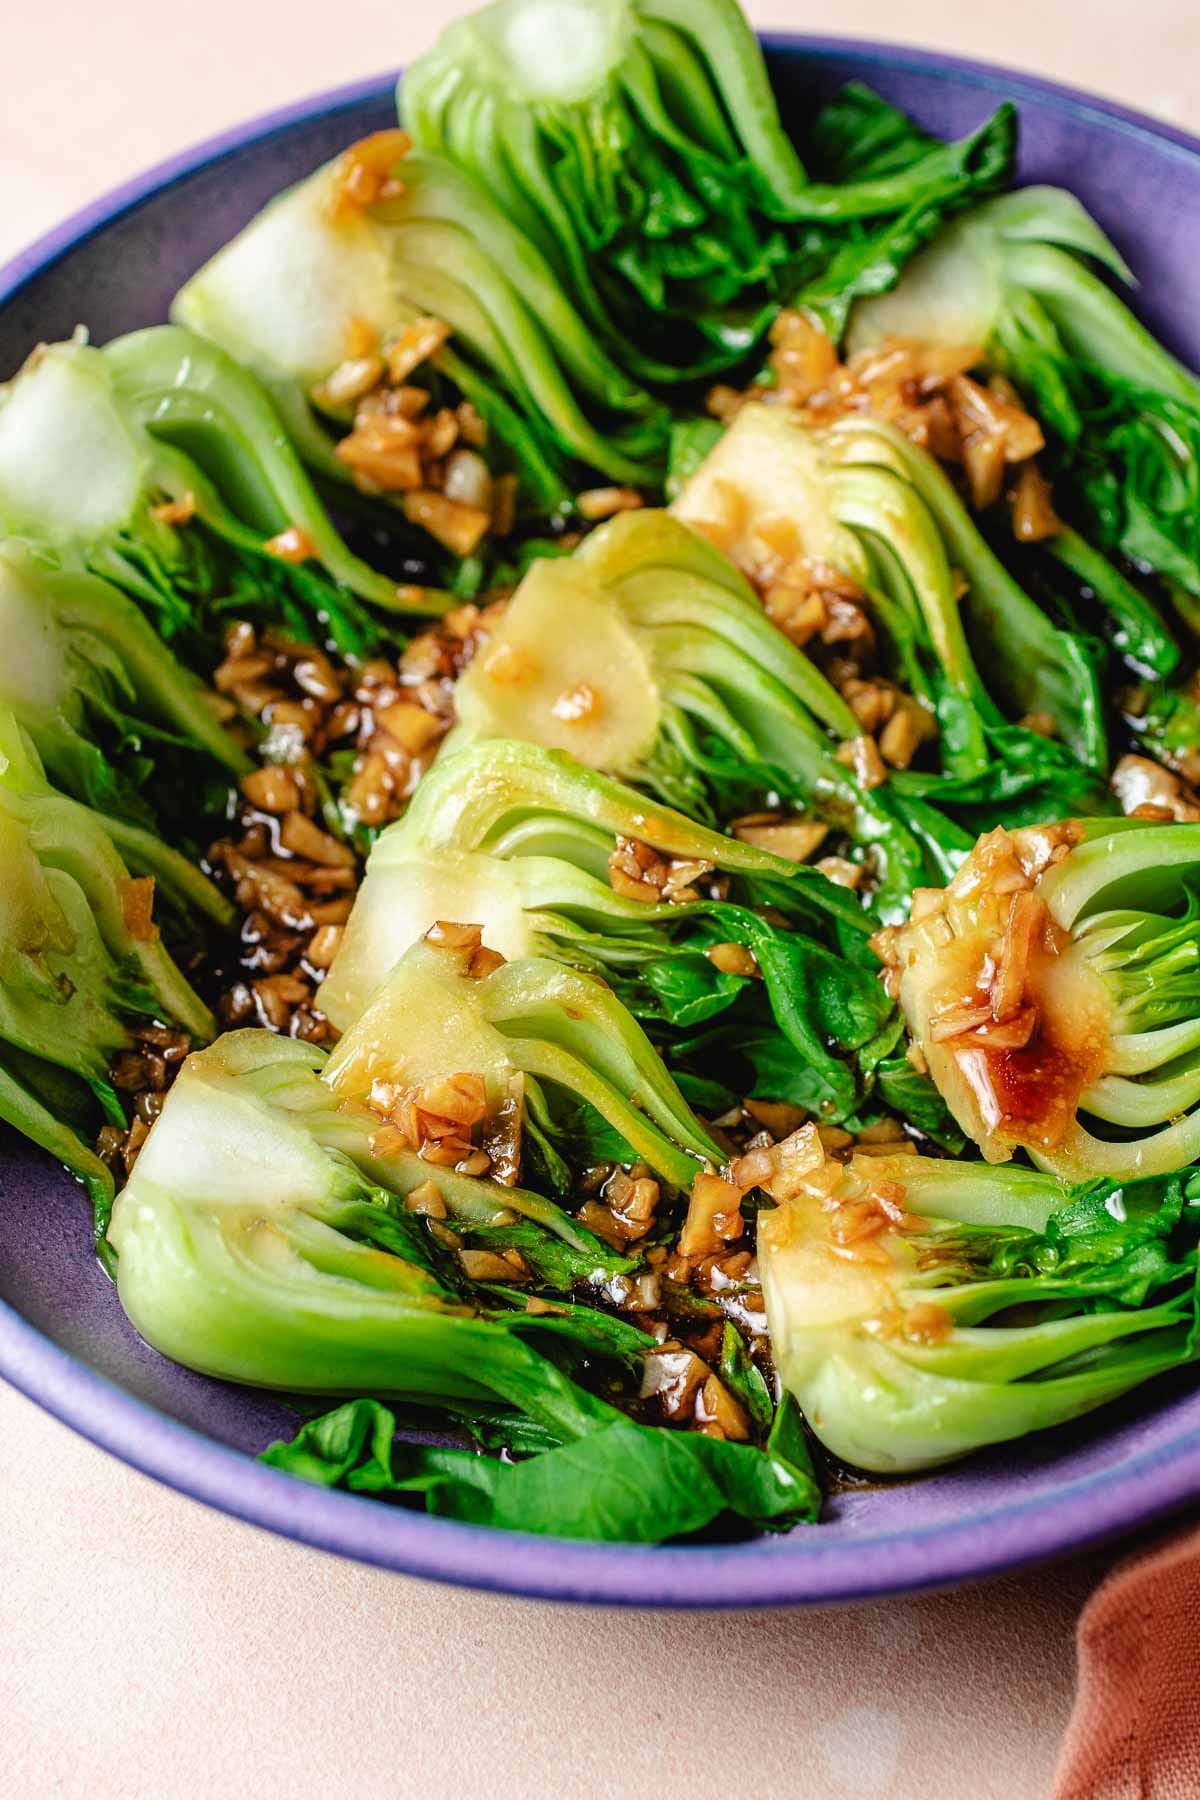 A side close shot image shows perfectly steamed baby bok choy to crisp tender and served with sauce on top